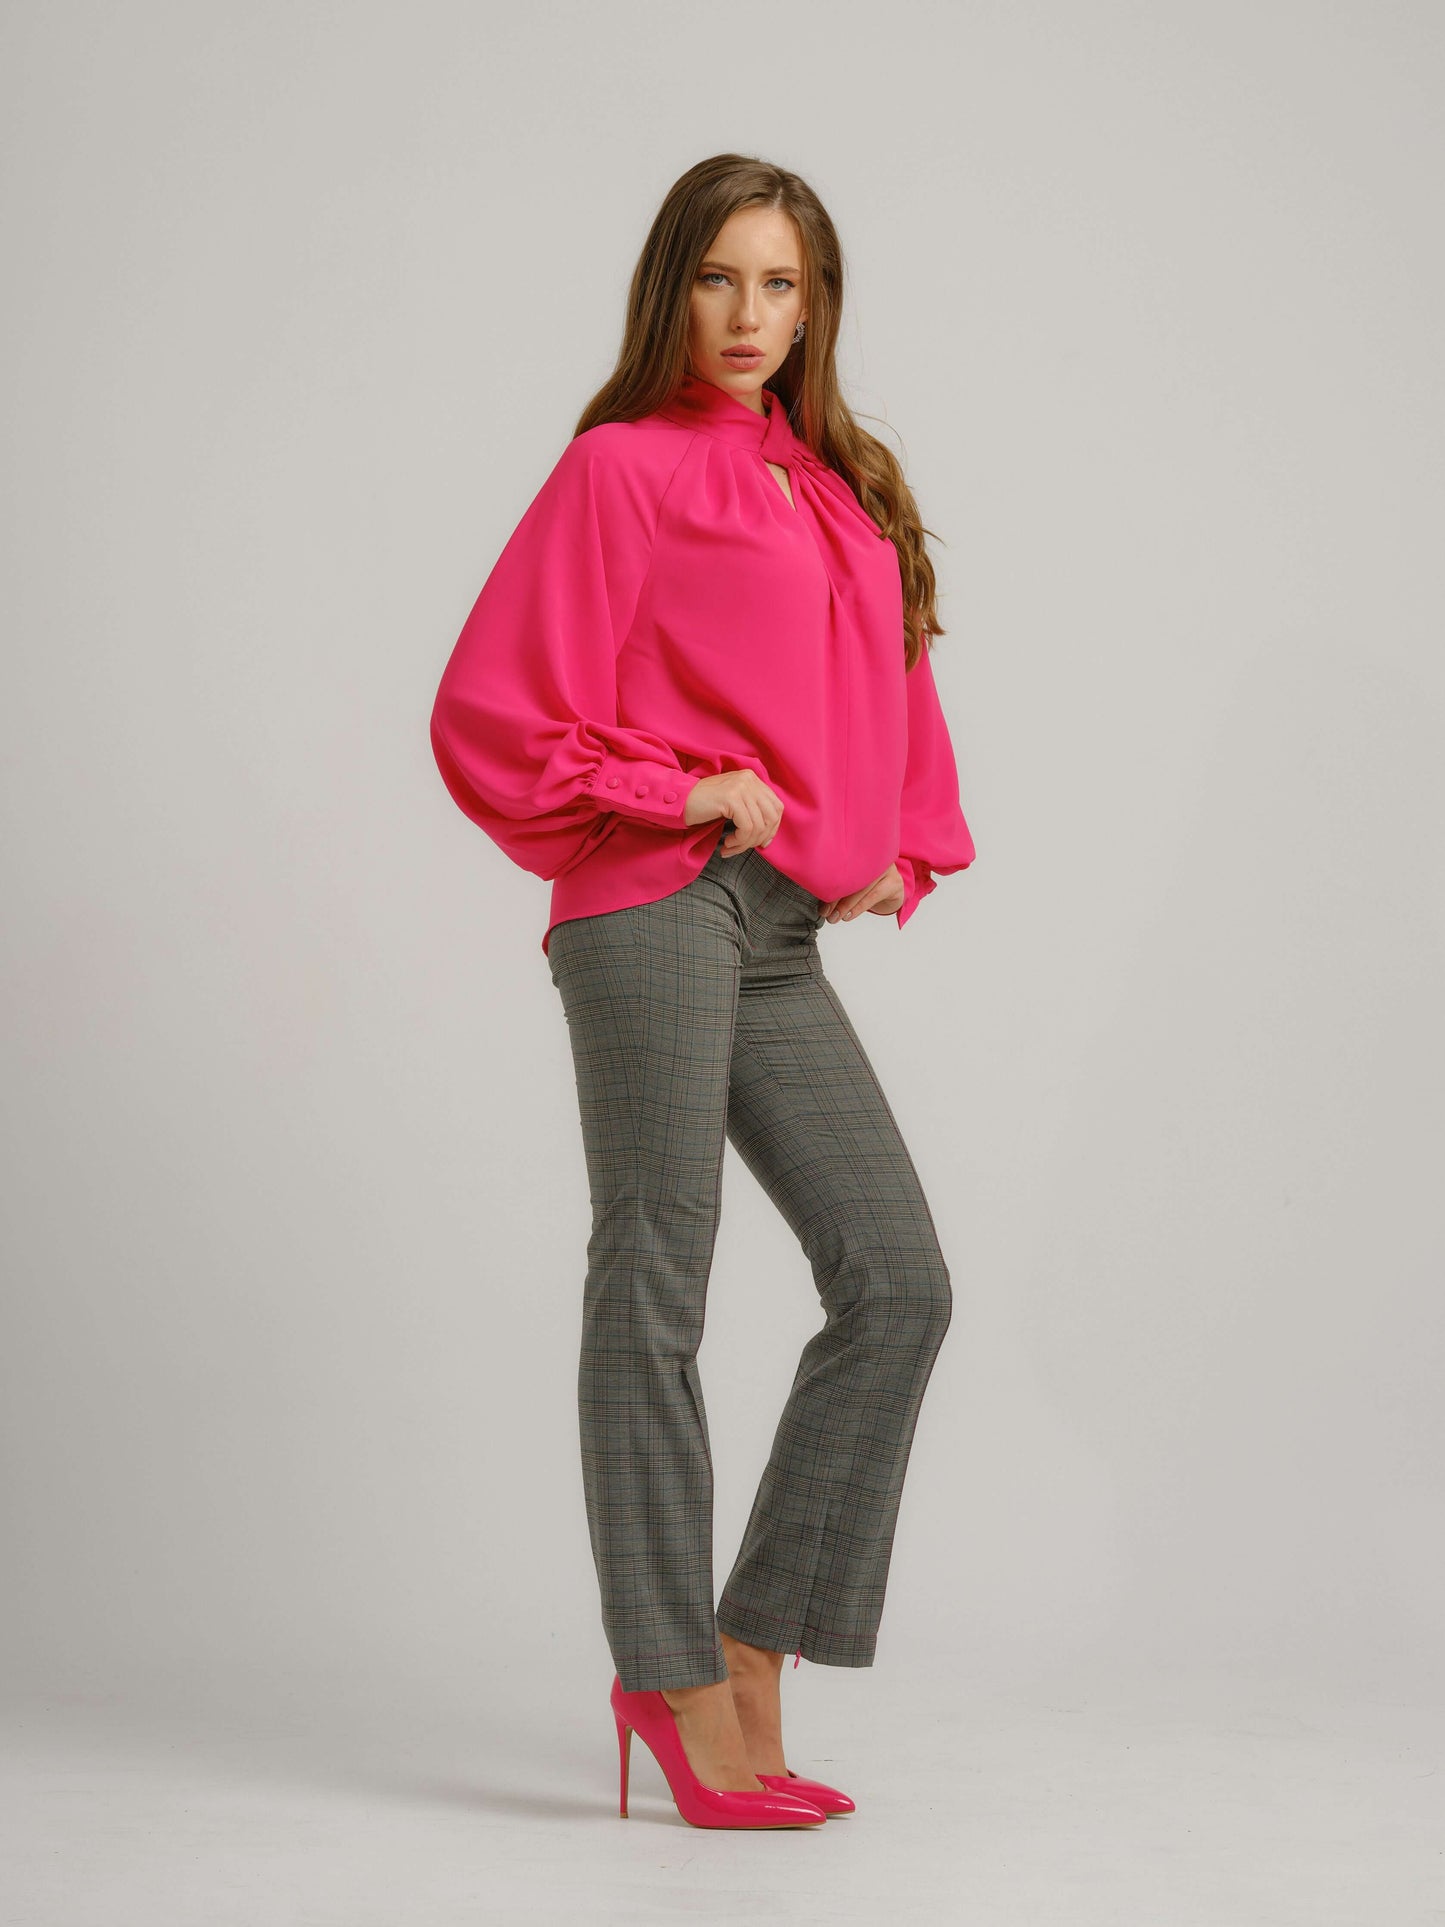 Get Down to Business Oversized Blouse - Pink by Tia Dorraine Women's Luxury Fashion Designer Clothing Brand